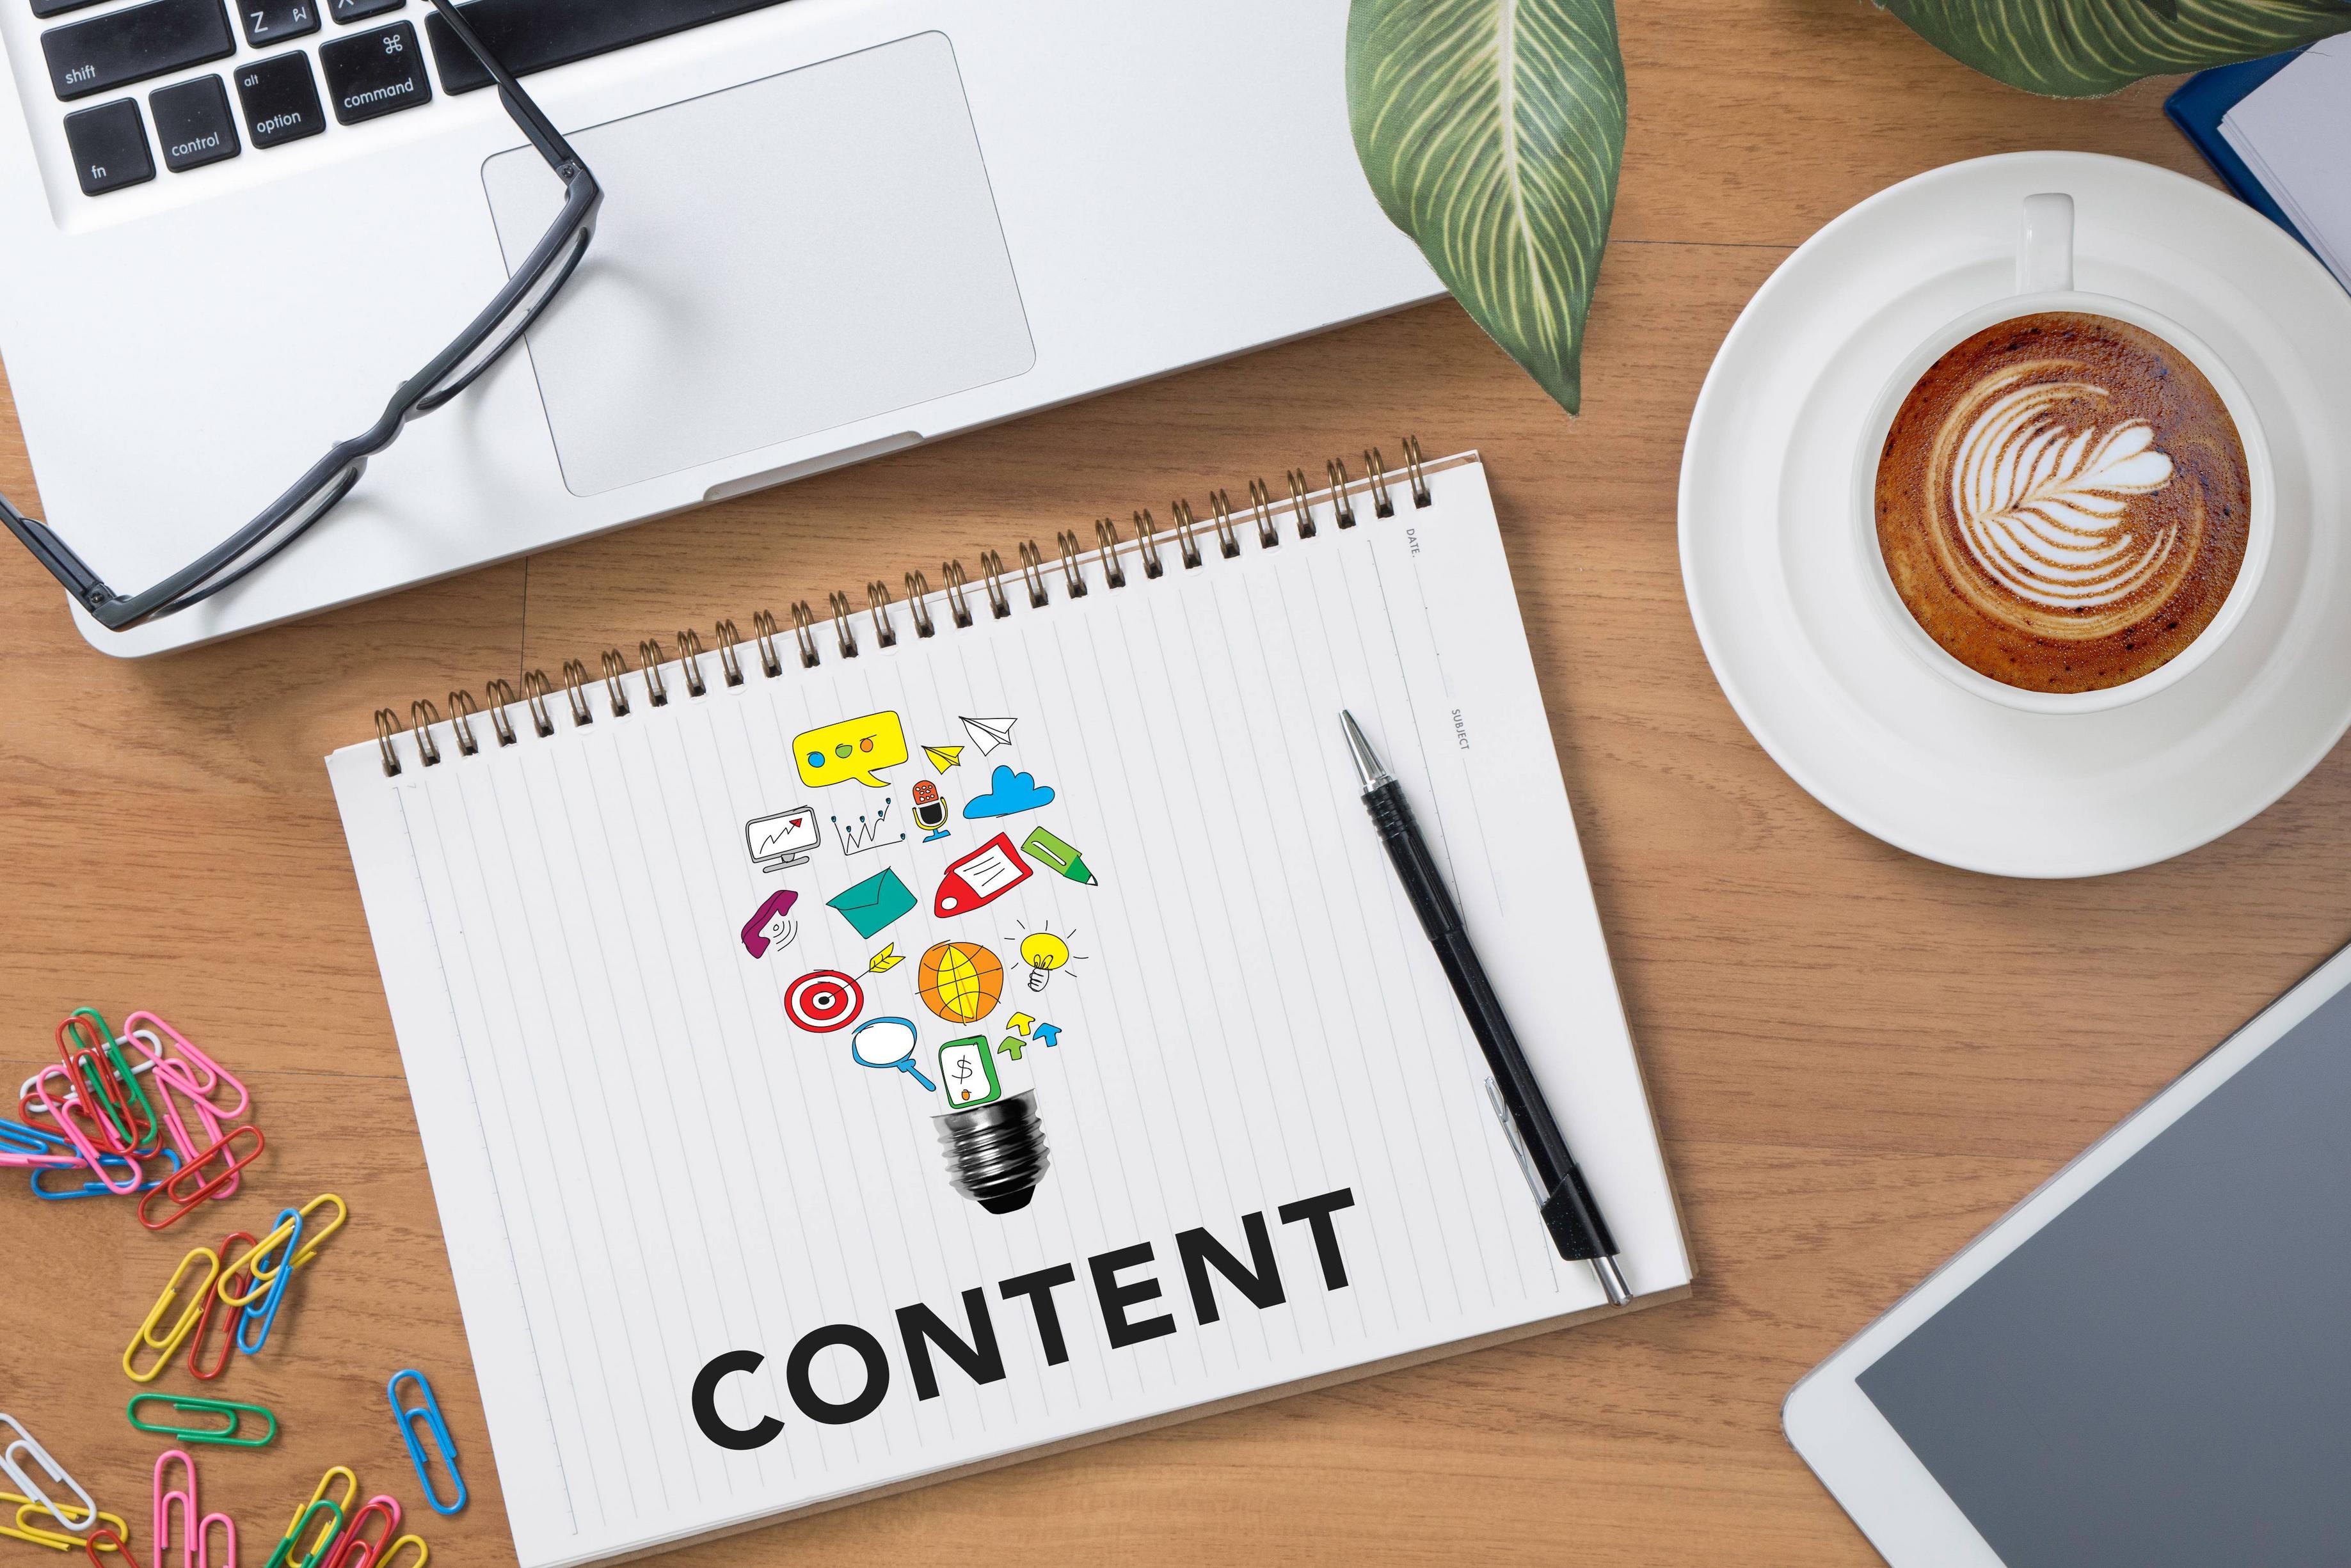 content marketing definition and example